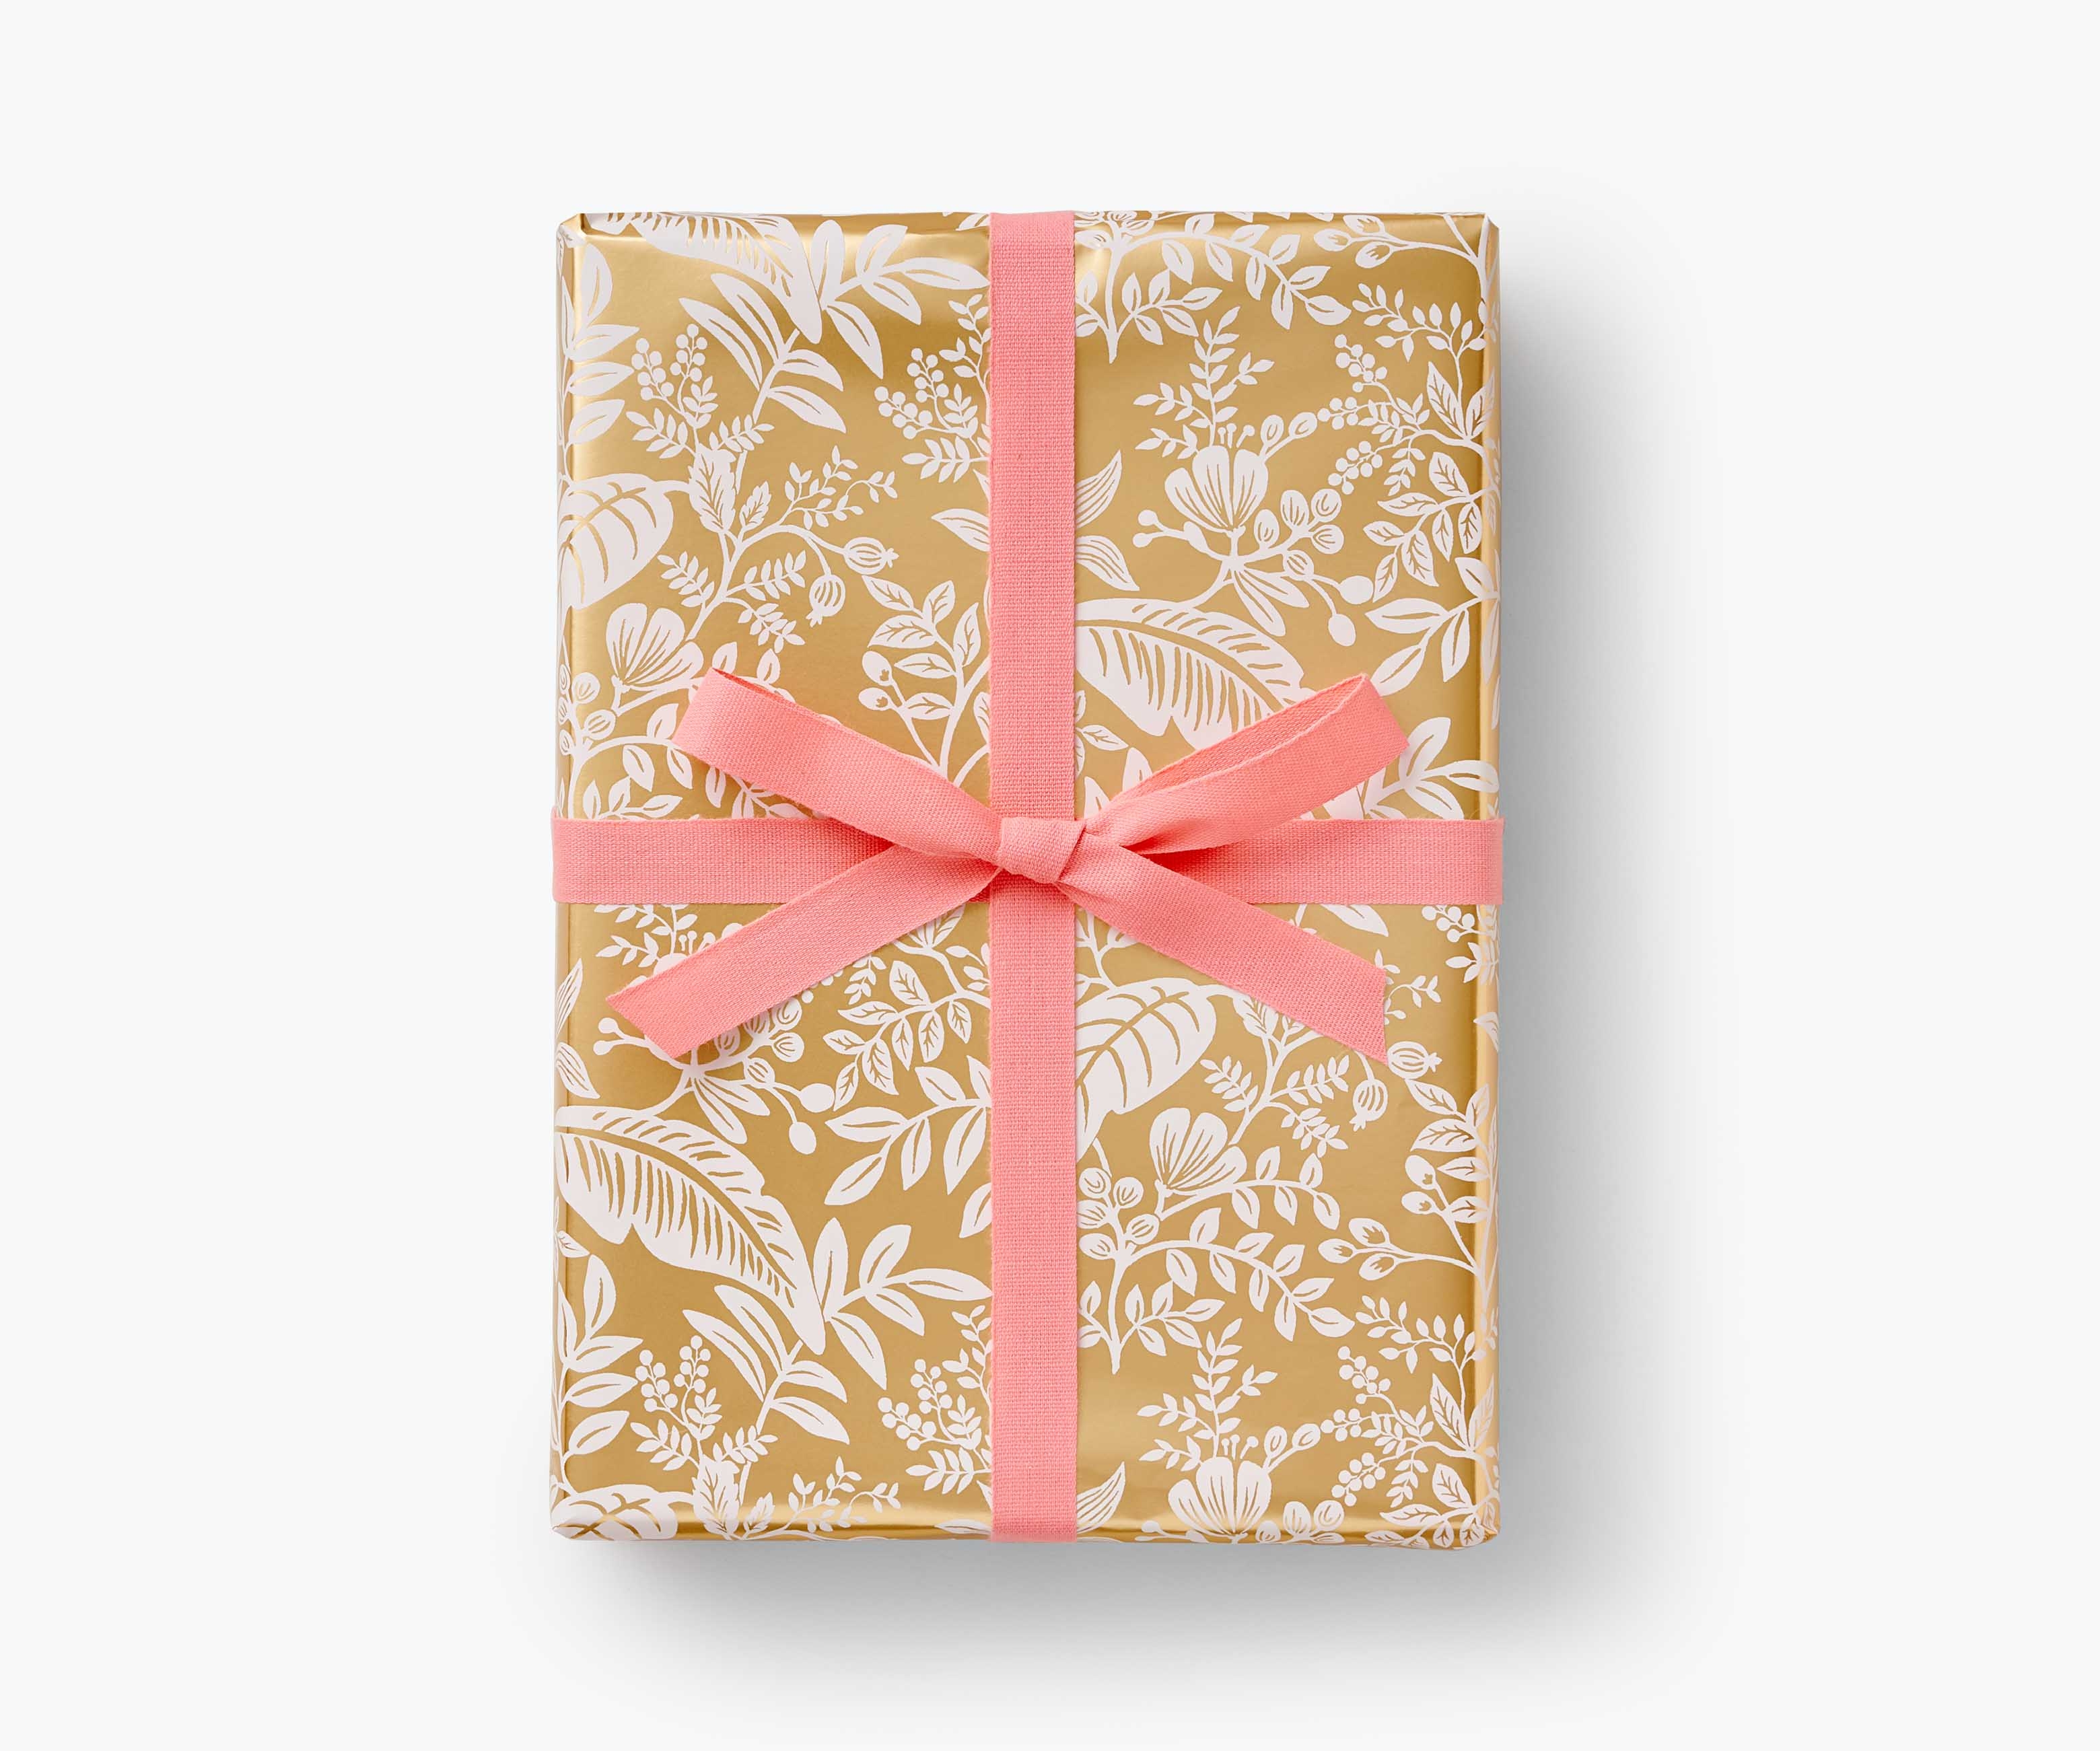 Gold Paper Roll Wrapping Paper for sale